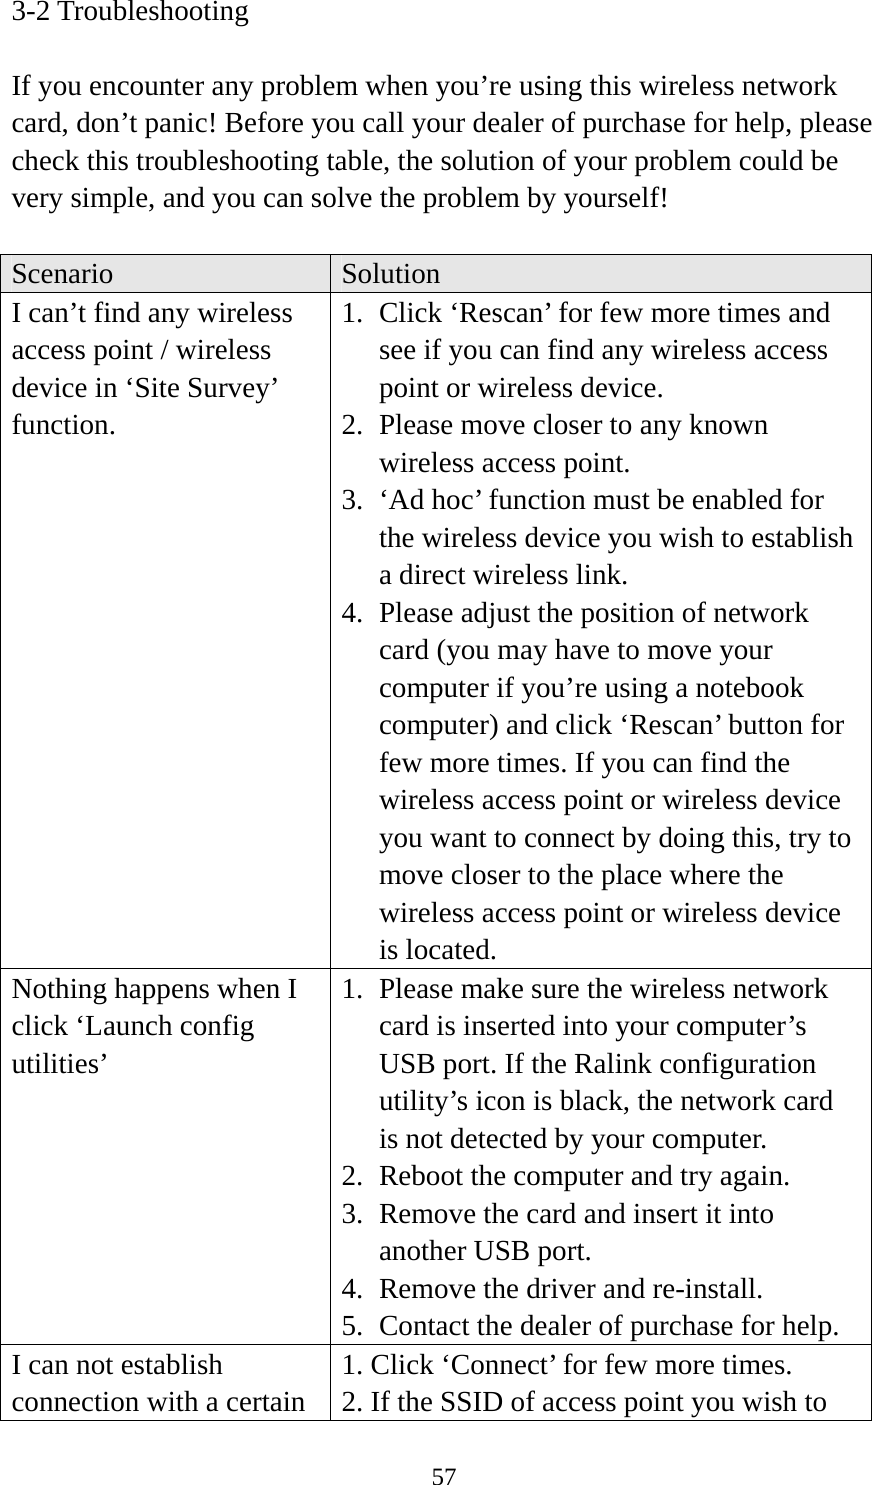  573-2 Troubleshooting  If you encounter any problem when you’re using this wireless network card, don’t panic! Before you call your dealer of purchase for help, please check this troubleshooting table, the solution of your problem could be very simple, and you can solve the problem by yourself!  Scenario  Solution I can’t find any wireless access point / wireless device in ‘Site Survey’ function. 1. Click ‘Rescan’ for few more times and see if you can find any wireless access point or wireless device. 2. Please move closer to any known wireless access point. 3. ‘Ad hoc’ function must be enabled for the wireless device you wish to establish a direct wireless link. 4. Please adjust the position of network card (you may have to move your computer if you’re using a notebook computer) and click ‘Rescan’ button for few more times. If you can find the wireless access point or wireless device you want to connect by doing this, try to move closer to the place where the wireless access point or wireless device is located. Nothing happens when I click ‘Launch config utilities’ 1. Please make sure the wireless network card is inserted into your computer’s USB port. If the Ralink configuration utility’s icon is black, the network card is not detected by your computer. 2. Reboot the computer and try again. 3. Remove the card and insert it into another USB port. 4. Remove the driver and re-install. 5. Contact the dealer of purchase for help. I can not establish connection with a certain 1. Click ‘Connect’ for few more times. 2. If the SSID of access point you wish to 